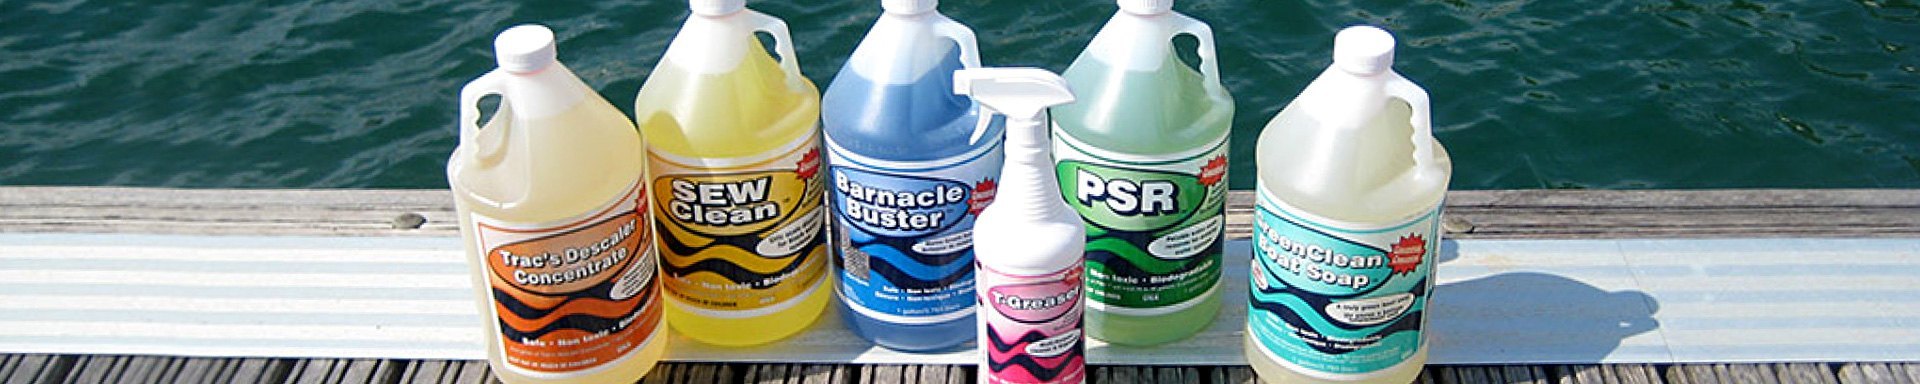 Trac Ecological Cleaners & Chemicals